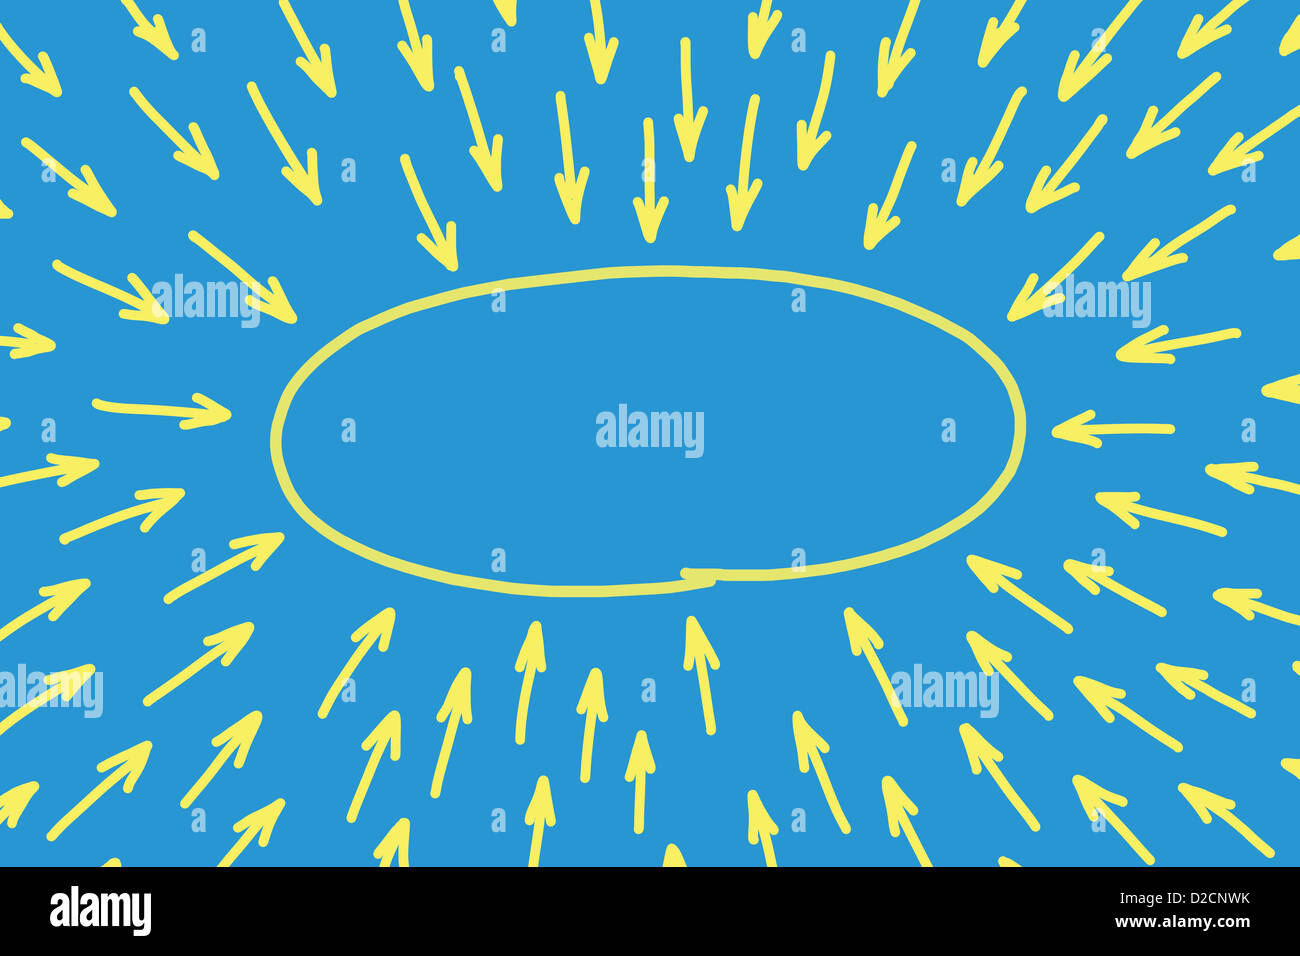 Blank yellow oval shape on blue background with many arrows pointing in it. Stock Photo